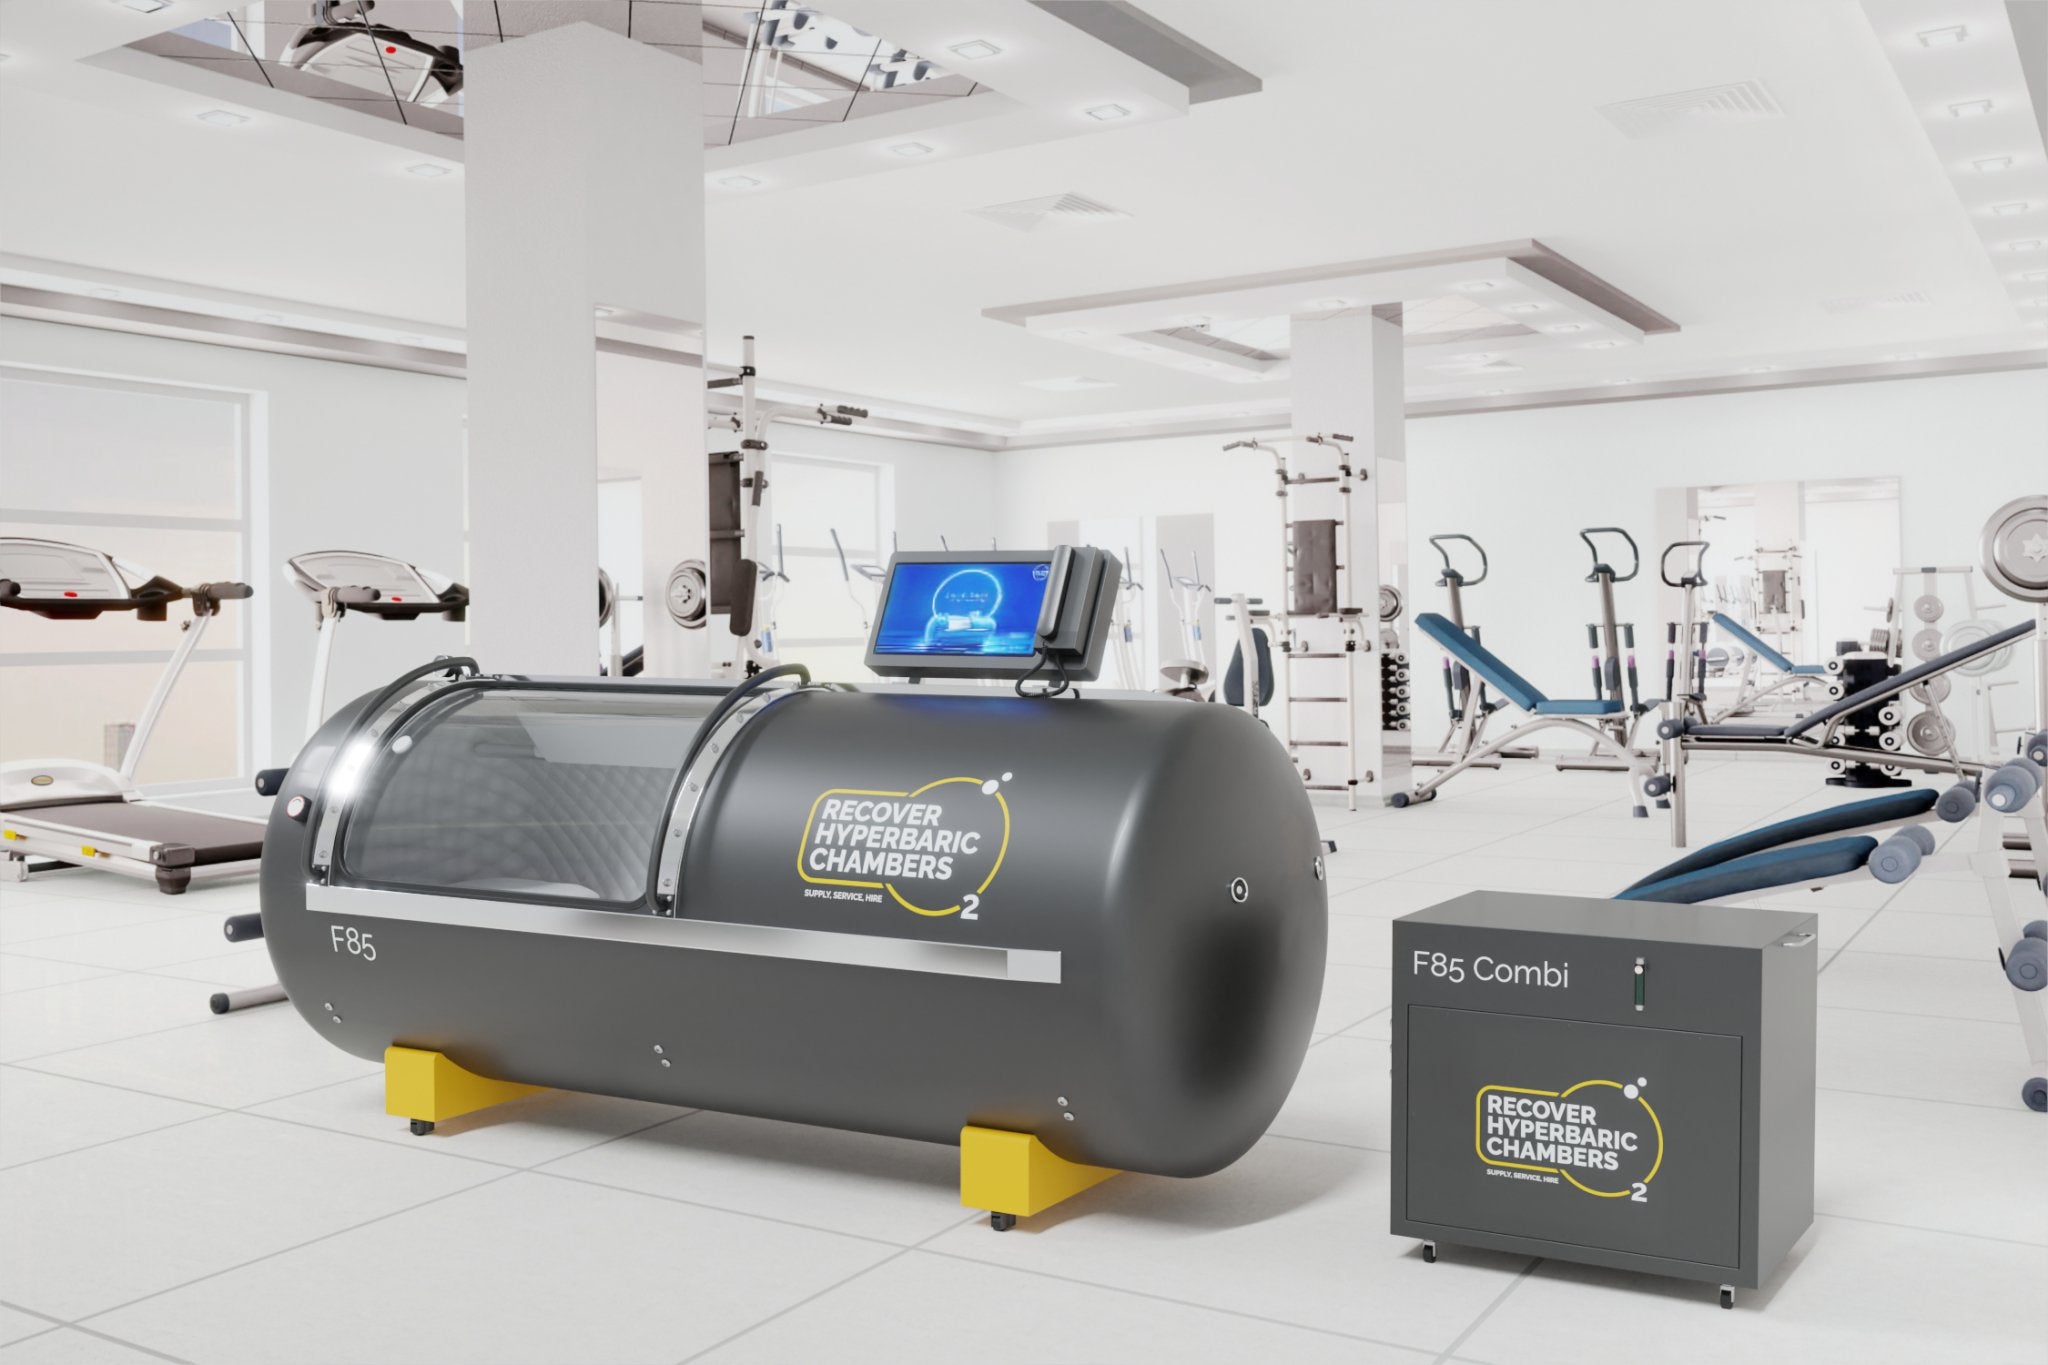 Recover Hyperbaric Chamber F85 Steel - Heracles Wellness